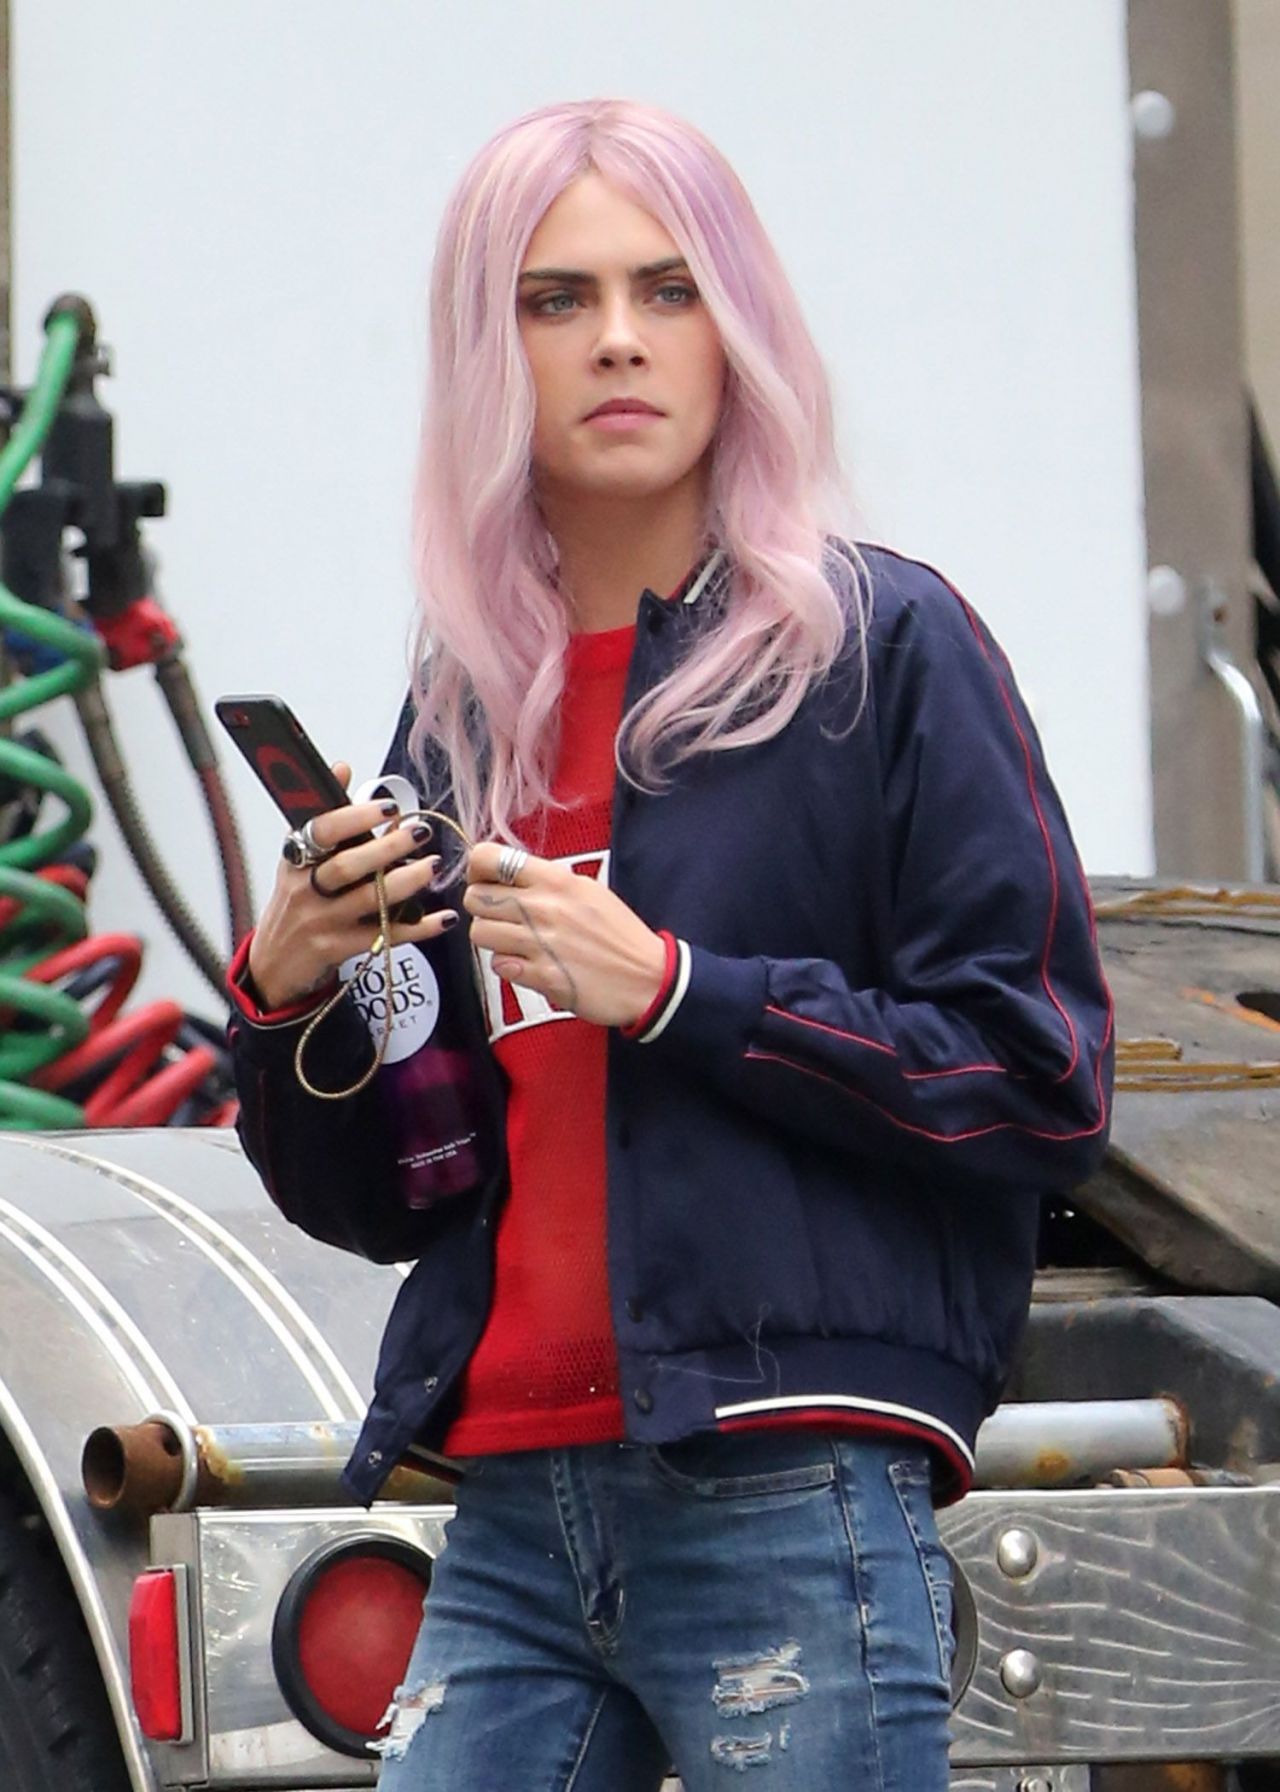 Cara Delevingne - On Set of "Life In A Year" in Toronto, Canada, April